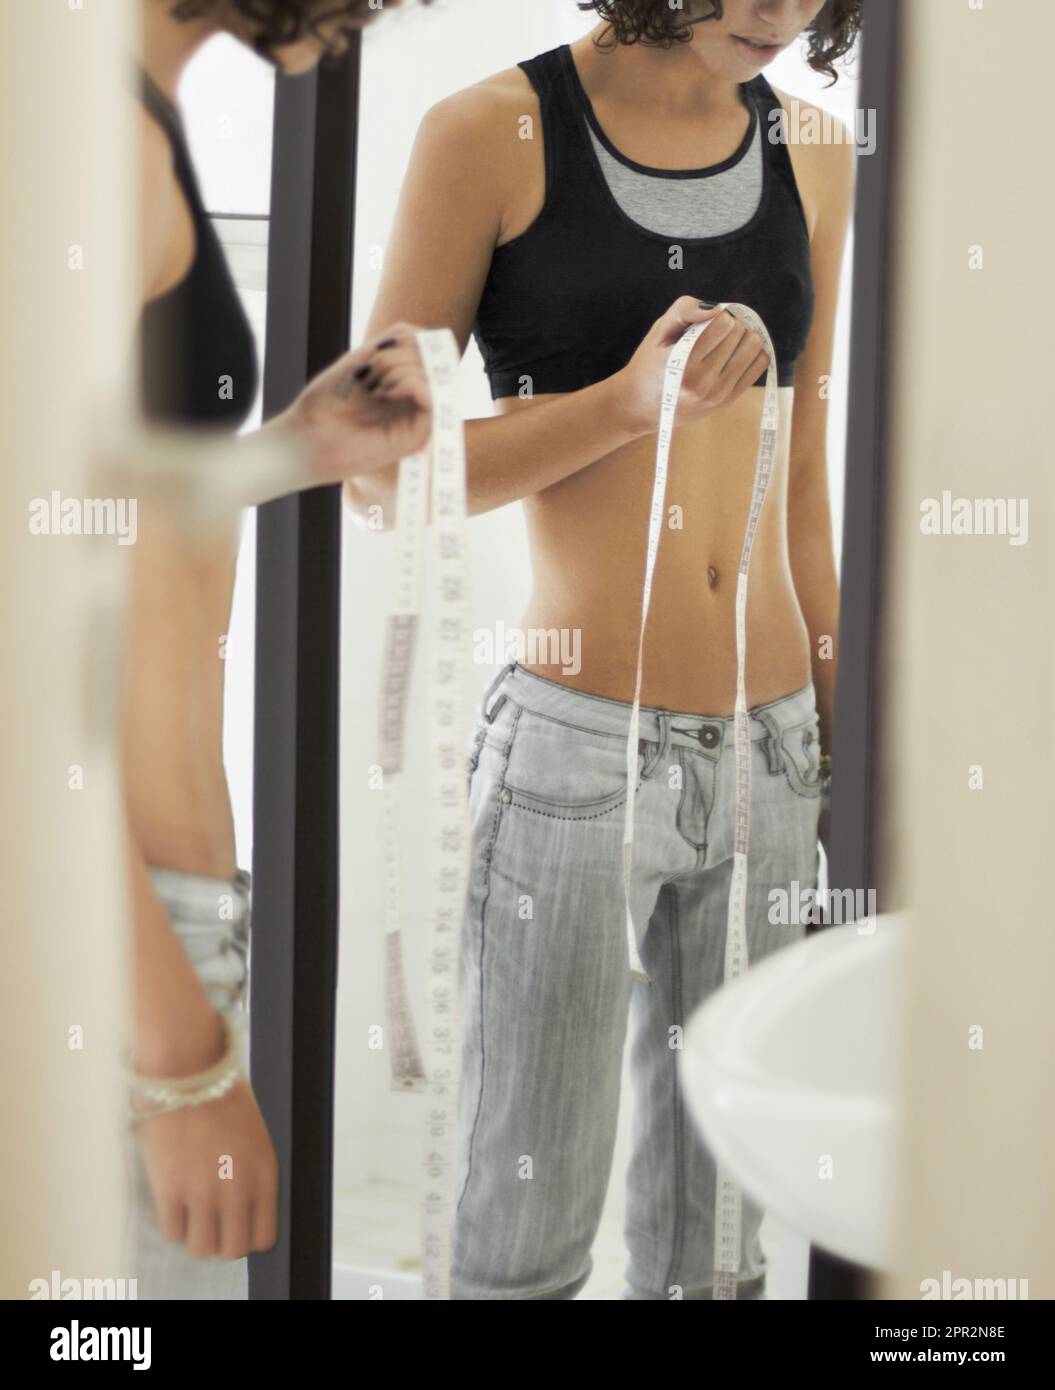 Anorexia, measuring tape and body of woman in mirror for weight loss, eating disorder and body image. Depression, mental health and sad with female at Stock Photo